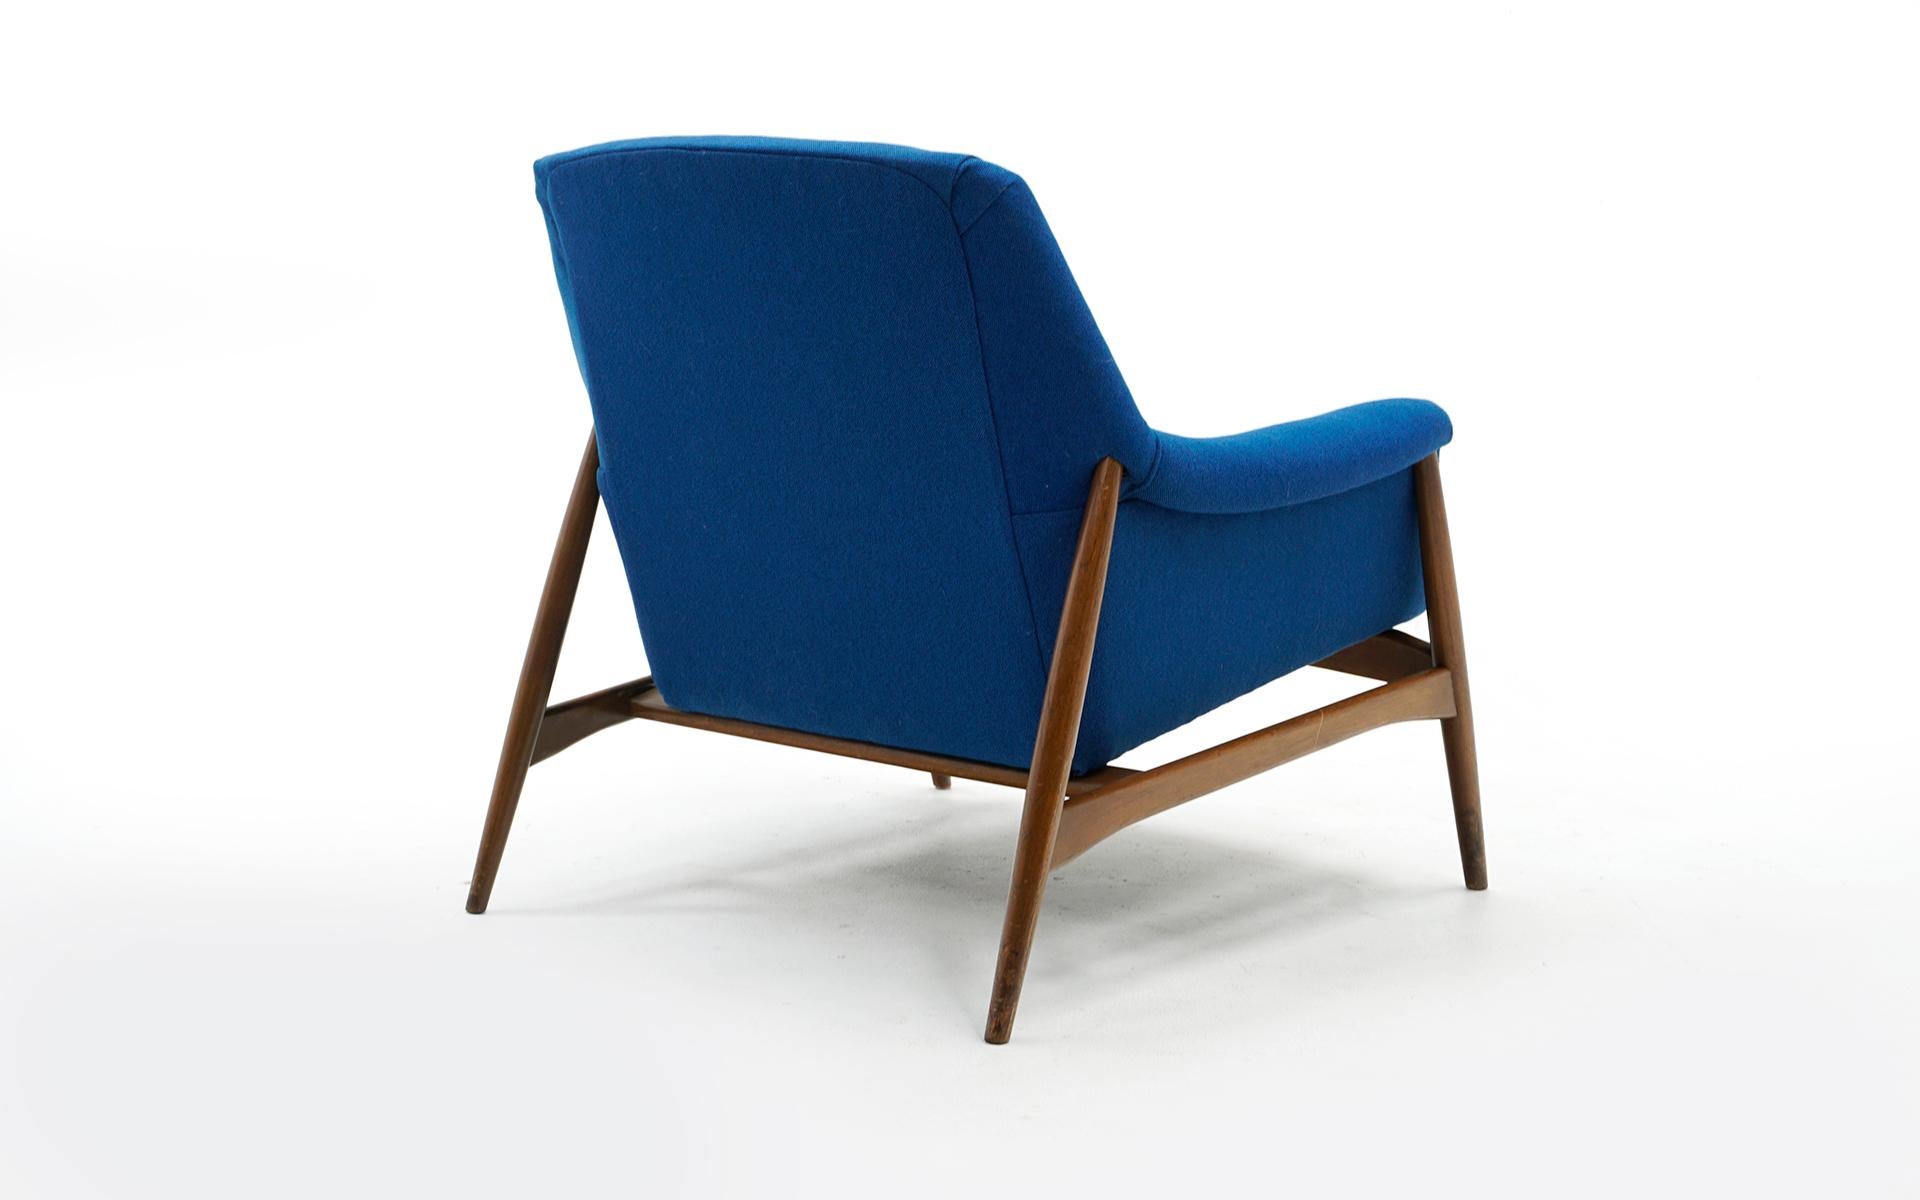 Mid-Century Modern Danish Modern Lounge Chair with Arms, Teak with New Blue Maharam Upholstery